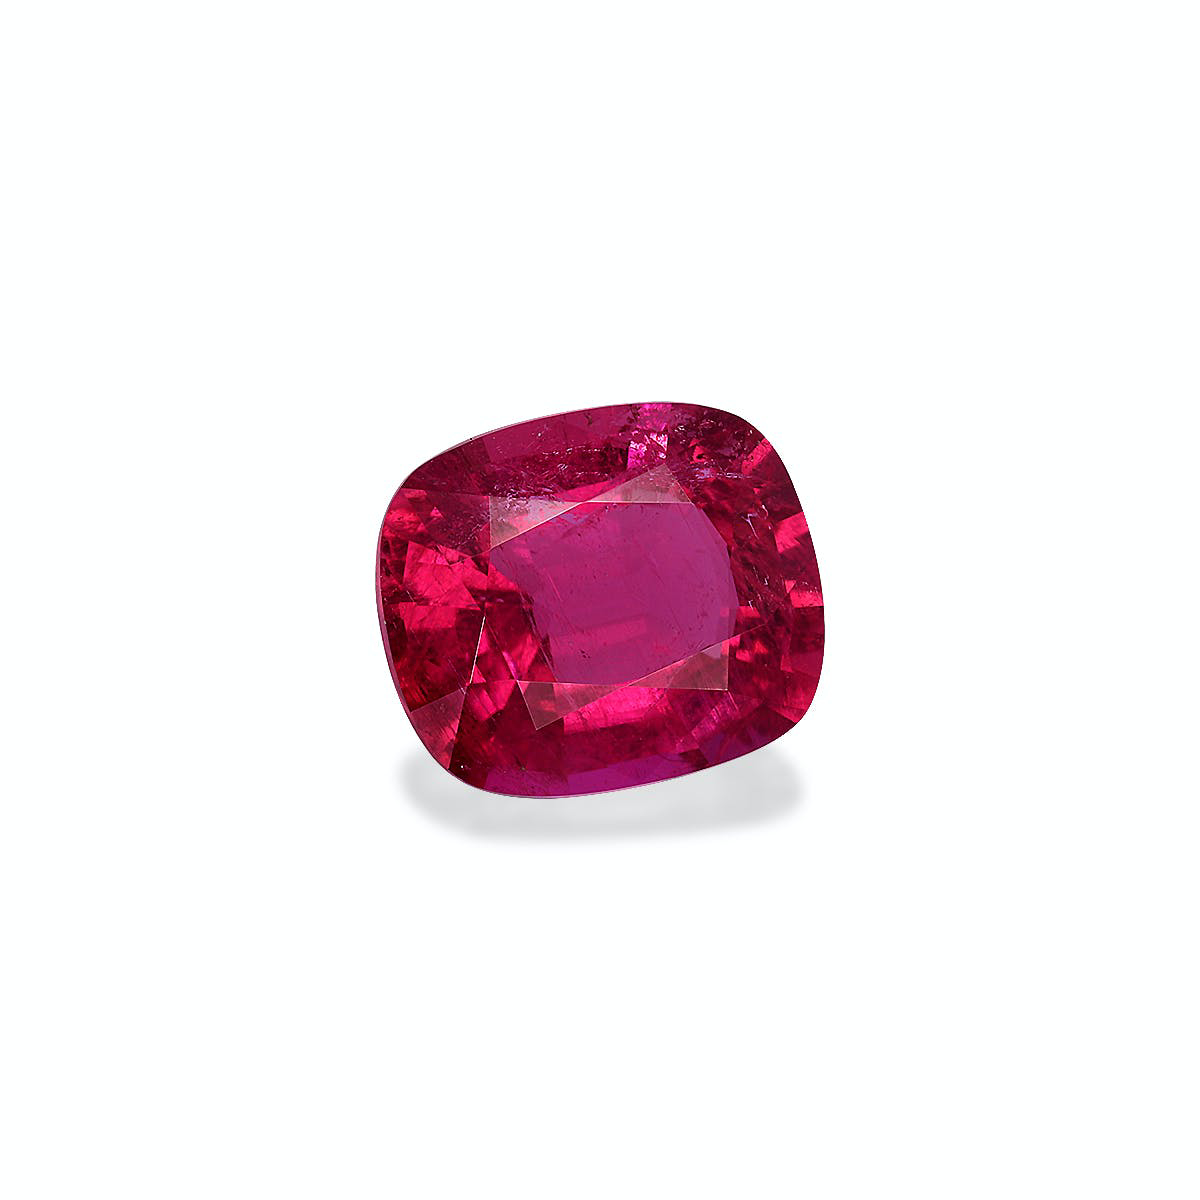 Picture of Pink Rubellite Tourmaline 3.49ct (RL1169)